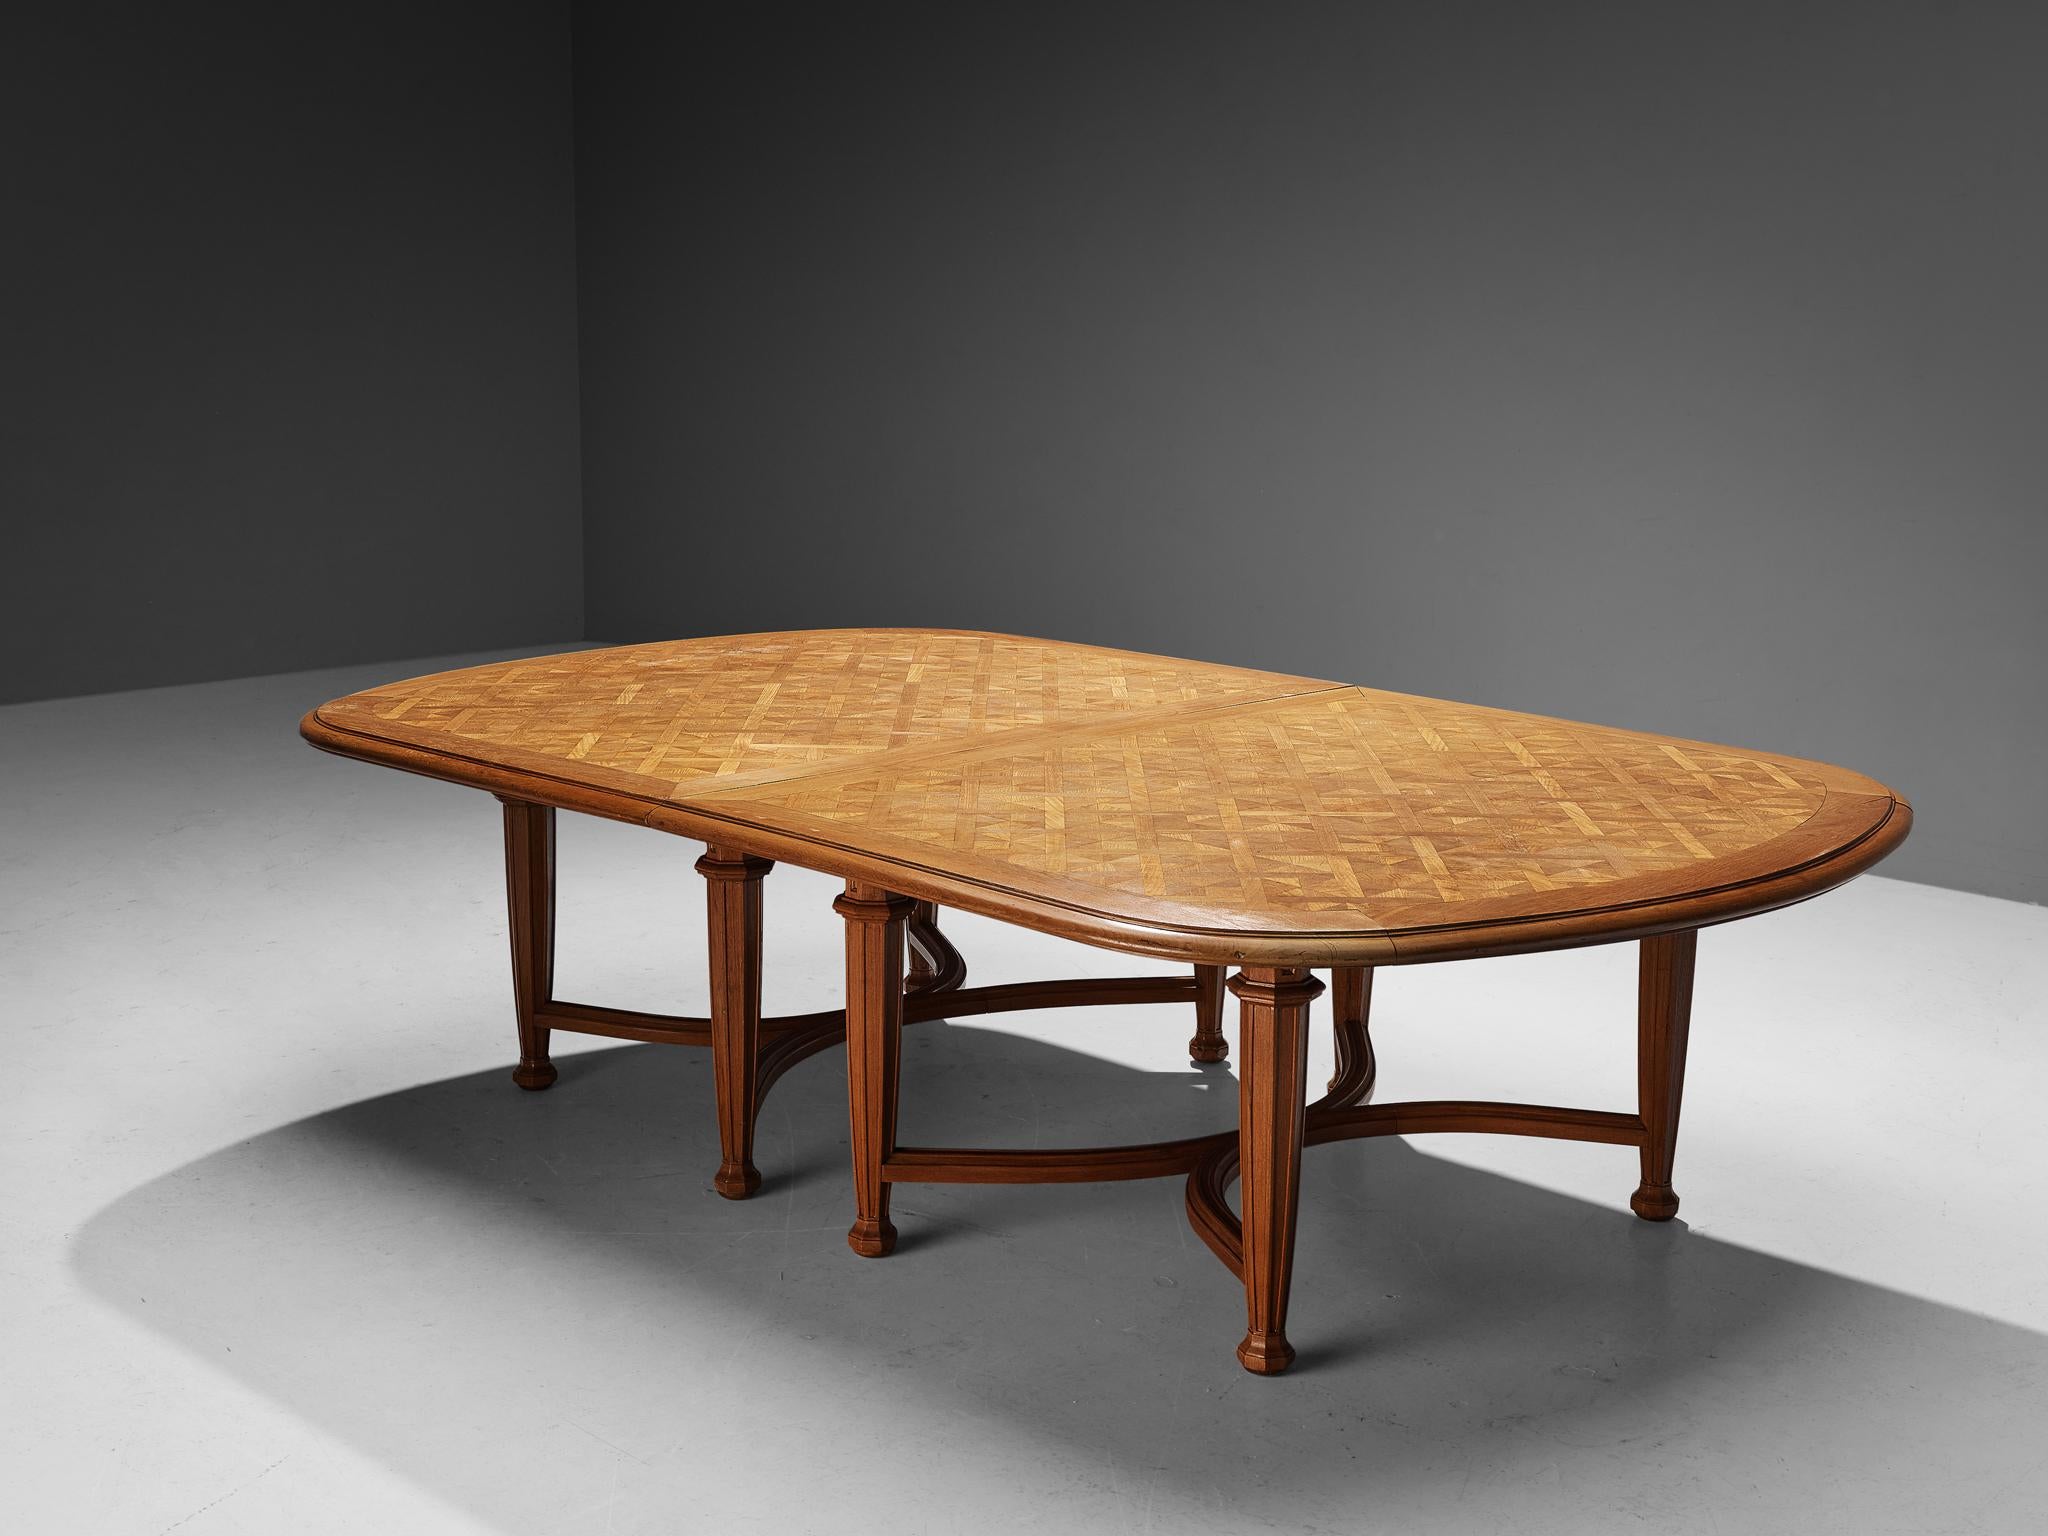 Dining table, oak, France, 1920s

This exquisite custom-made dining table of French origin undoubtedly breathes the Art Deco Period of the 1920s. The top is executed with a graphic wooden inlay that shows a geometric pattern of angular shapes. The